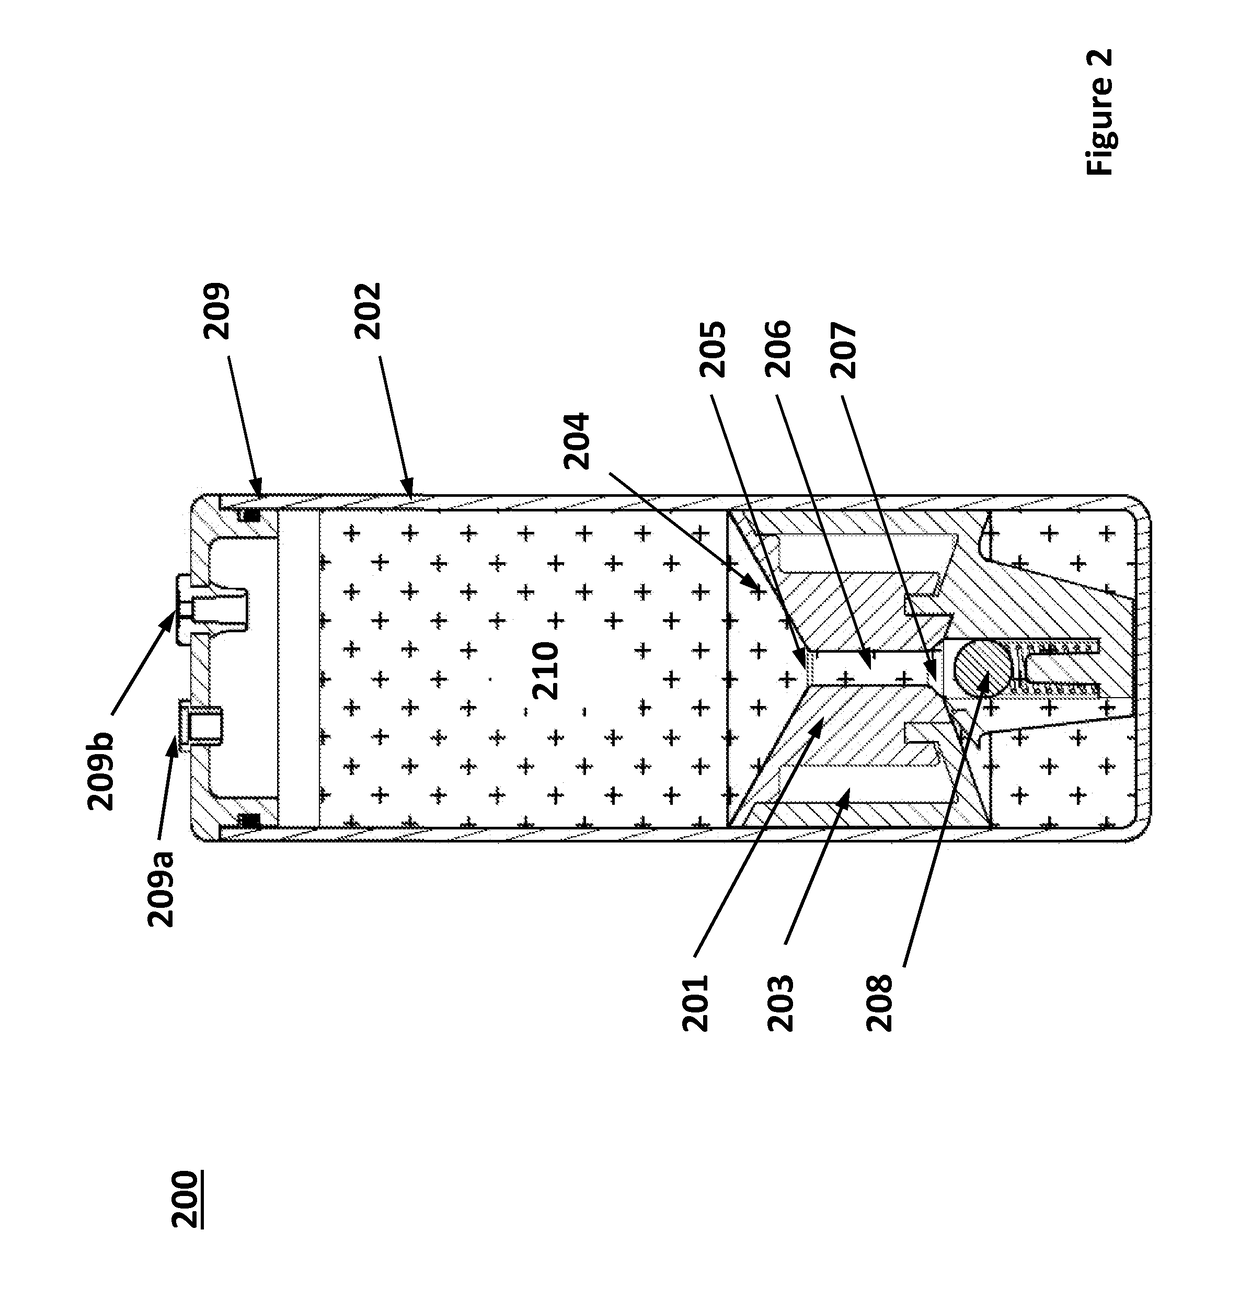 Centrifuge Tube Comprising a Floating Buoy, and Methods for Using the Same